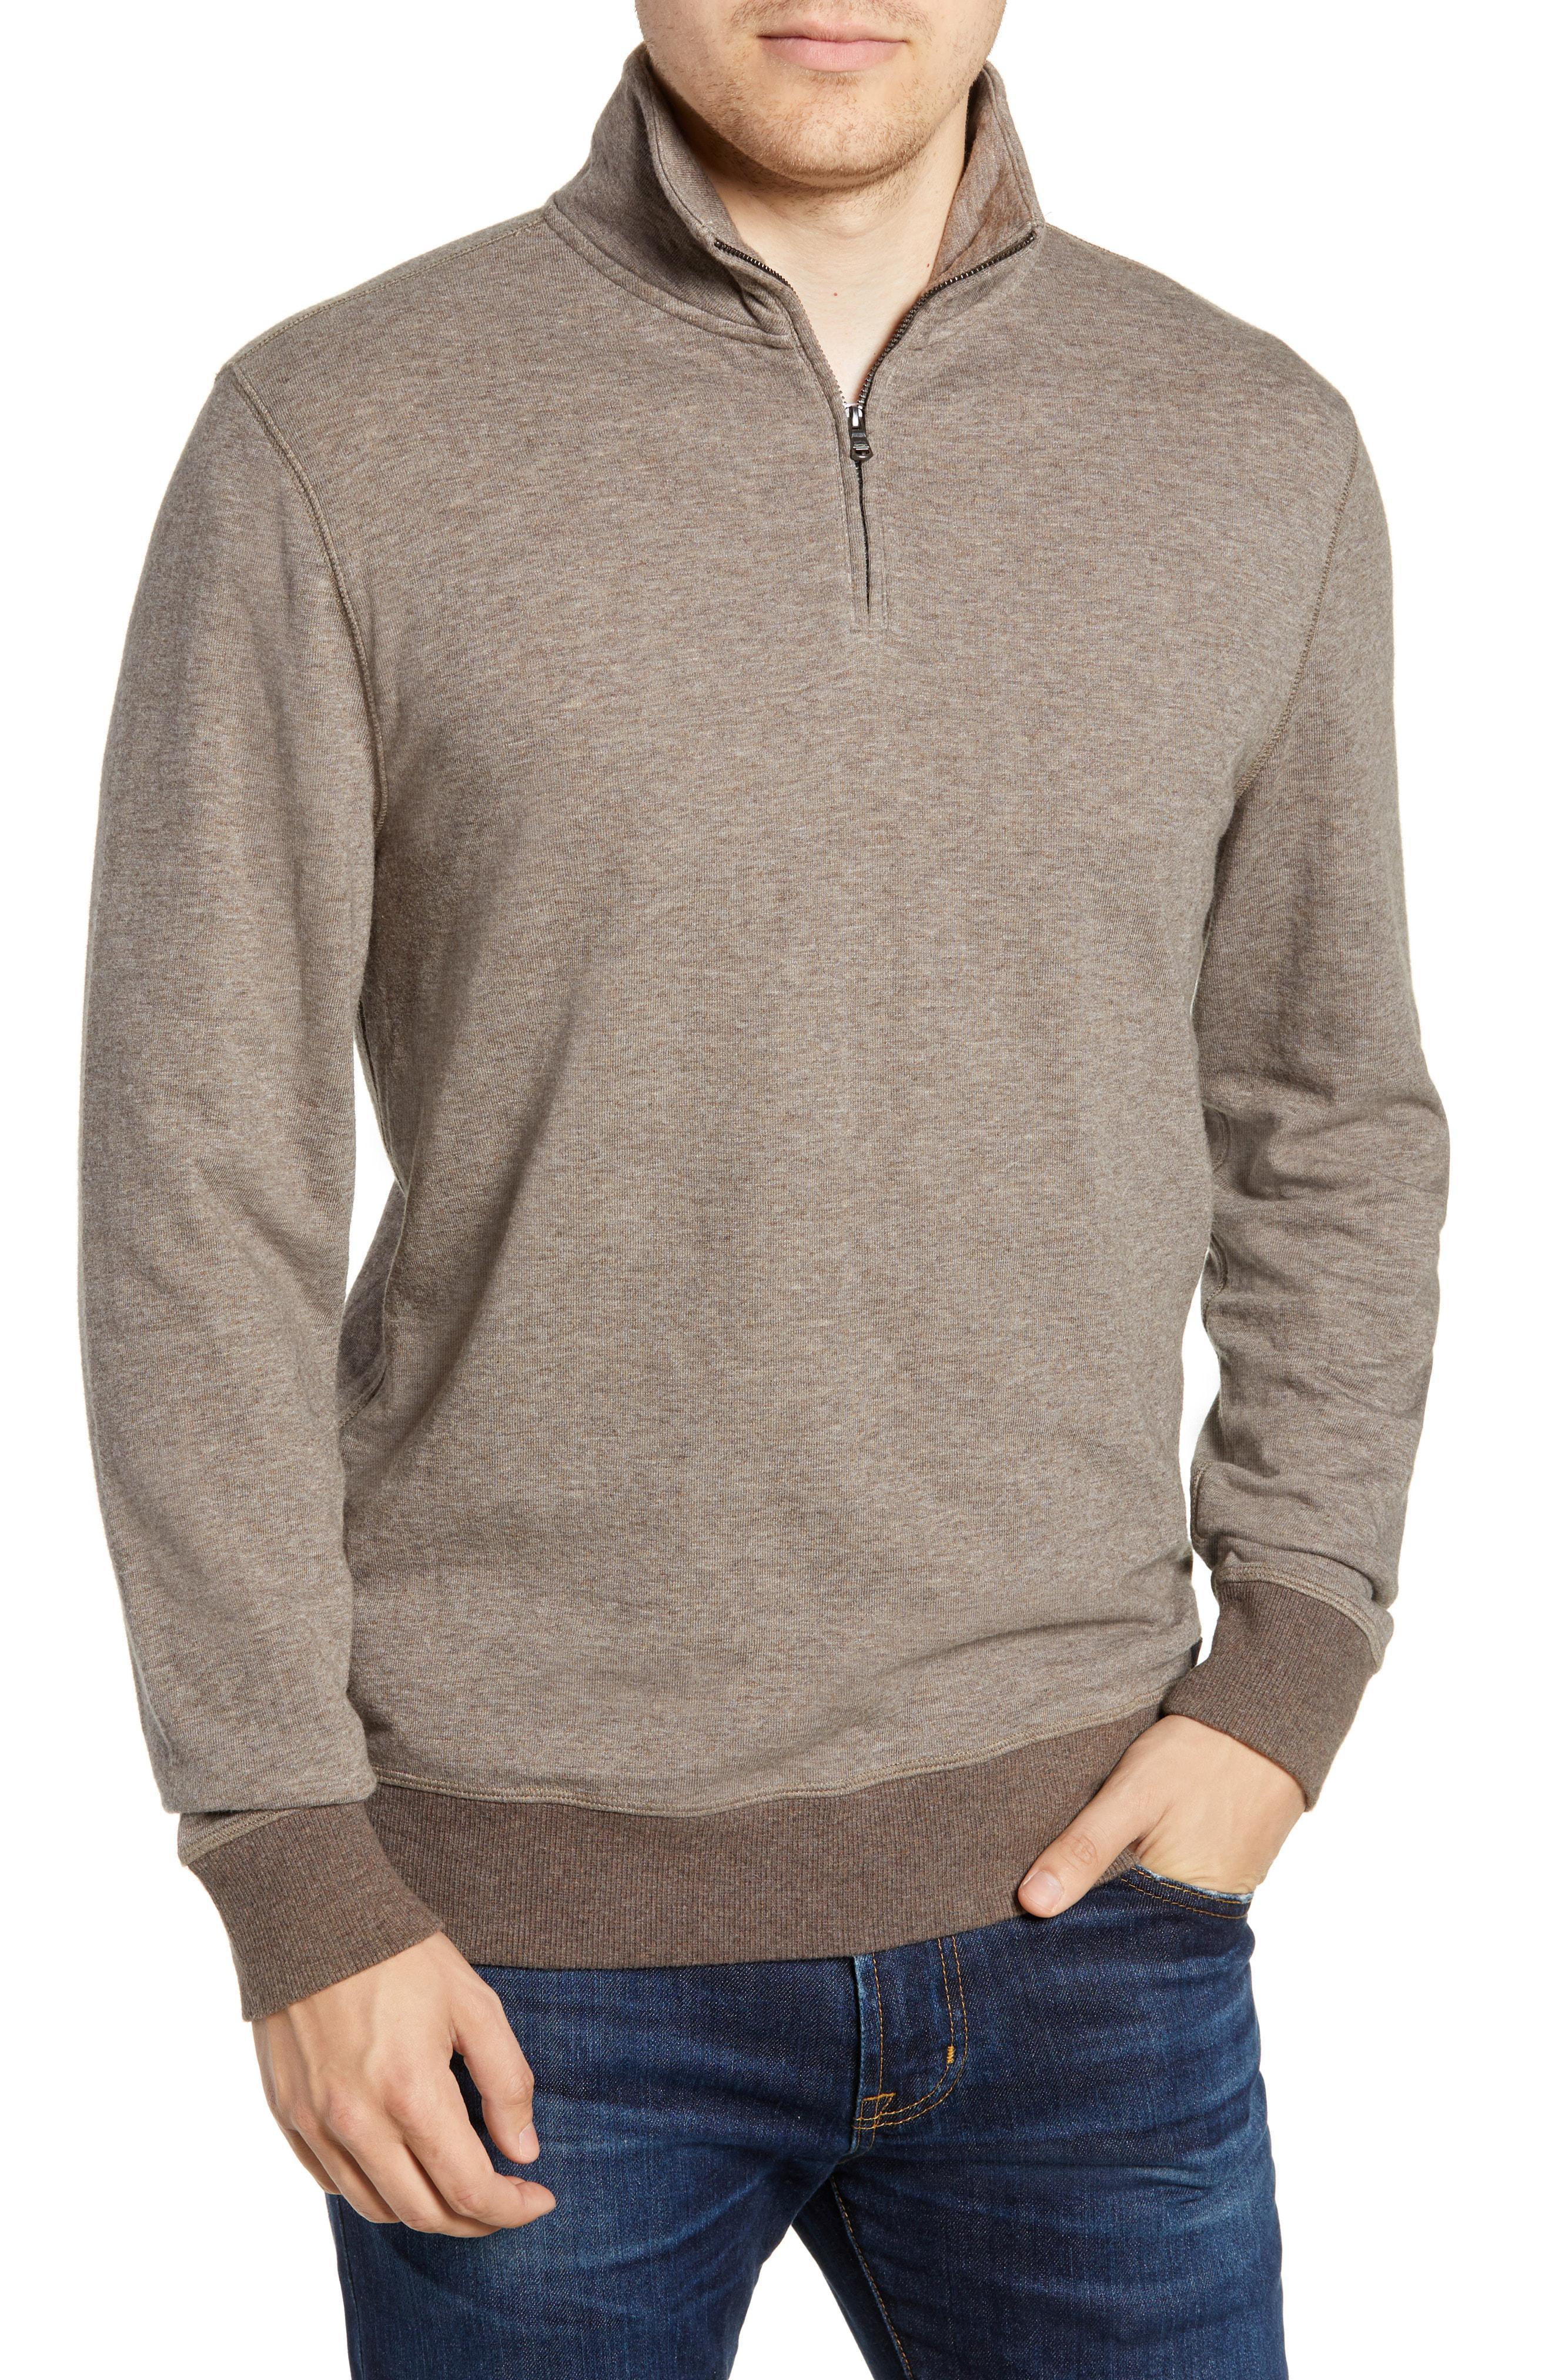 Lyst - Faherty Brand Dual Knit Regular Fit Quarter Zip Pullover in Gray ...